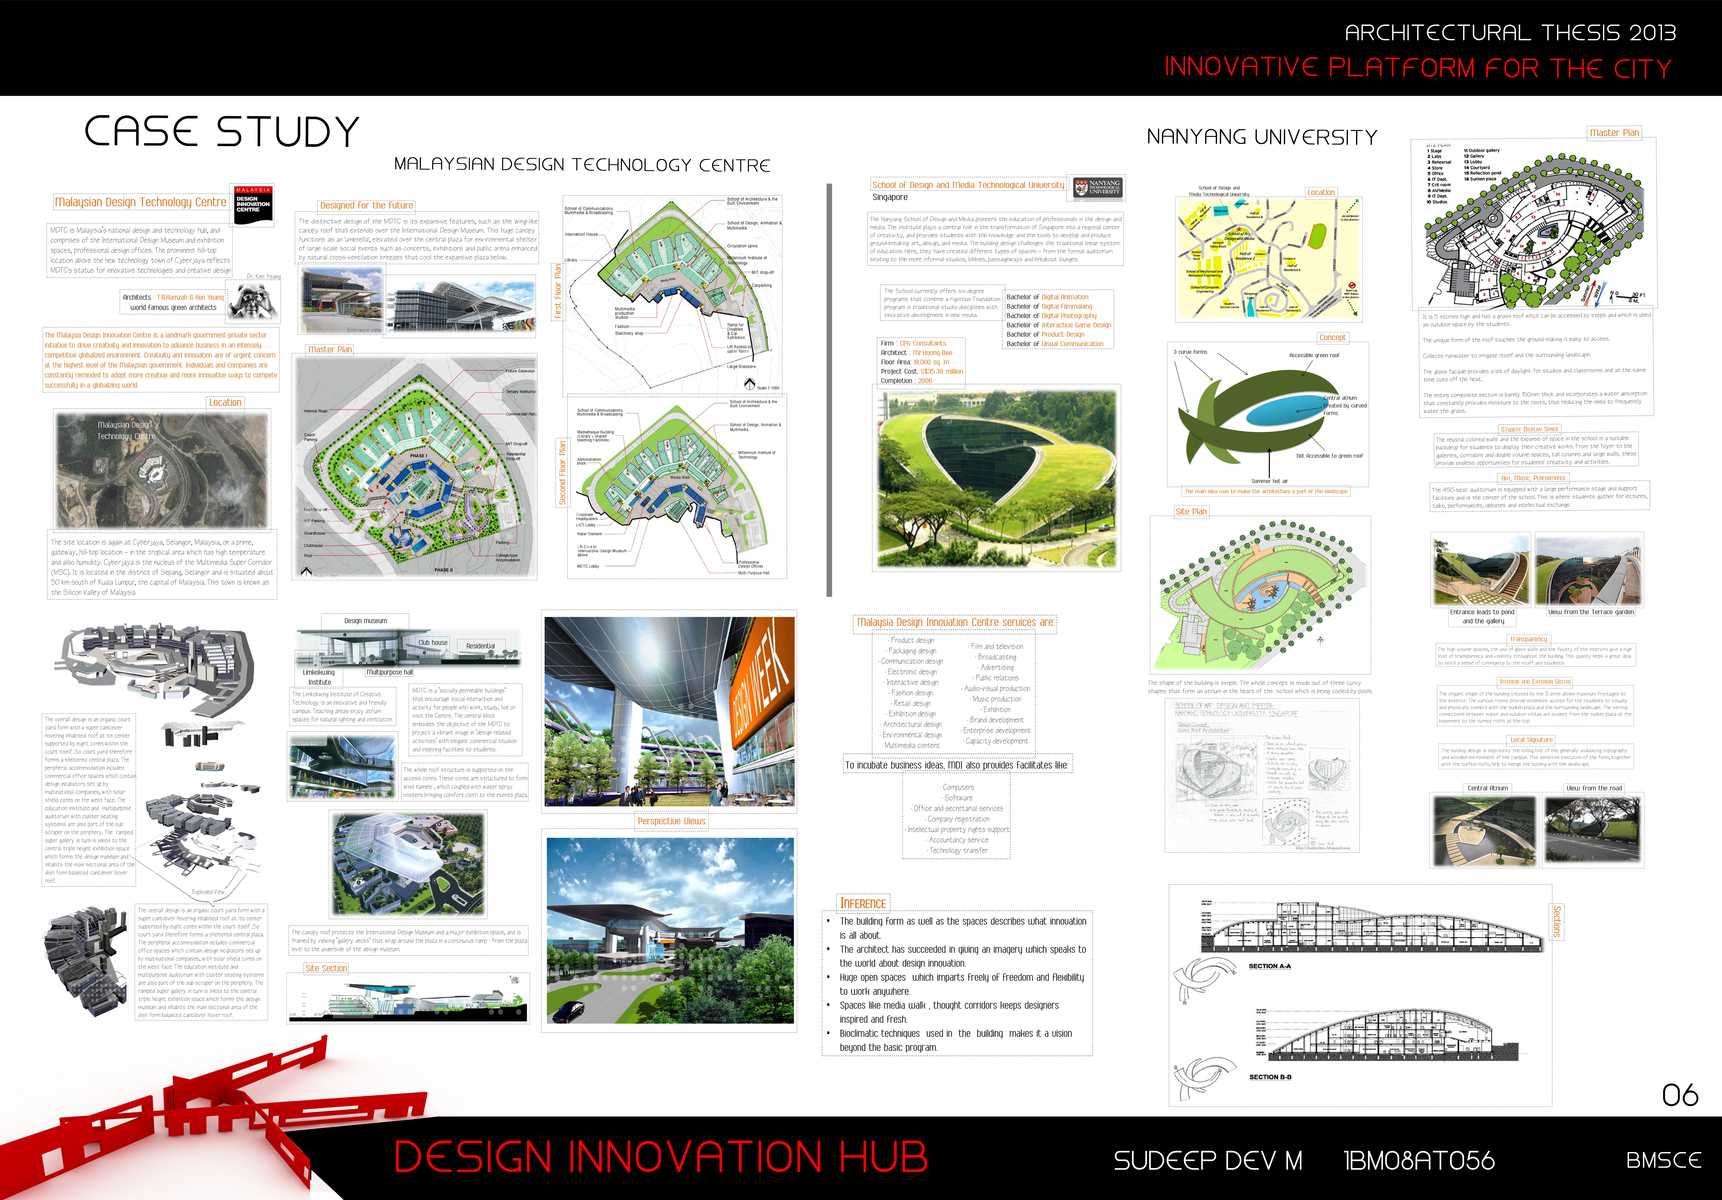 architectural thesis 2013